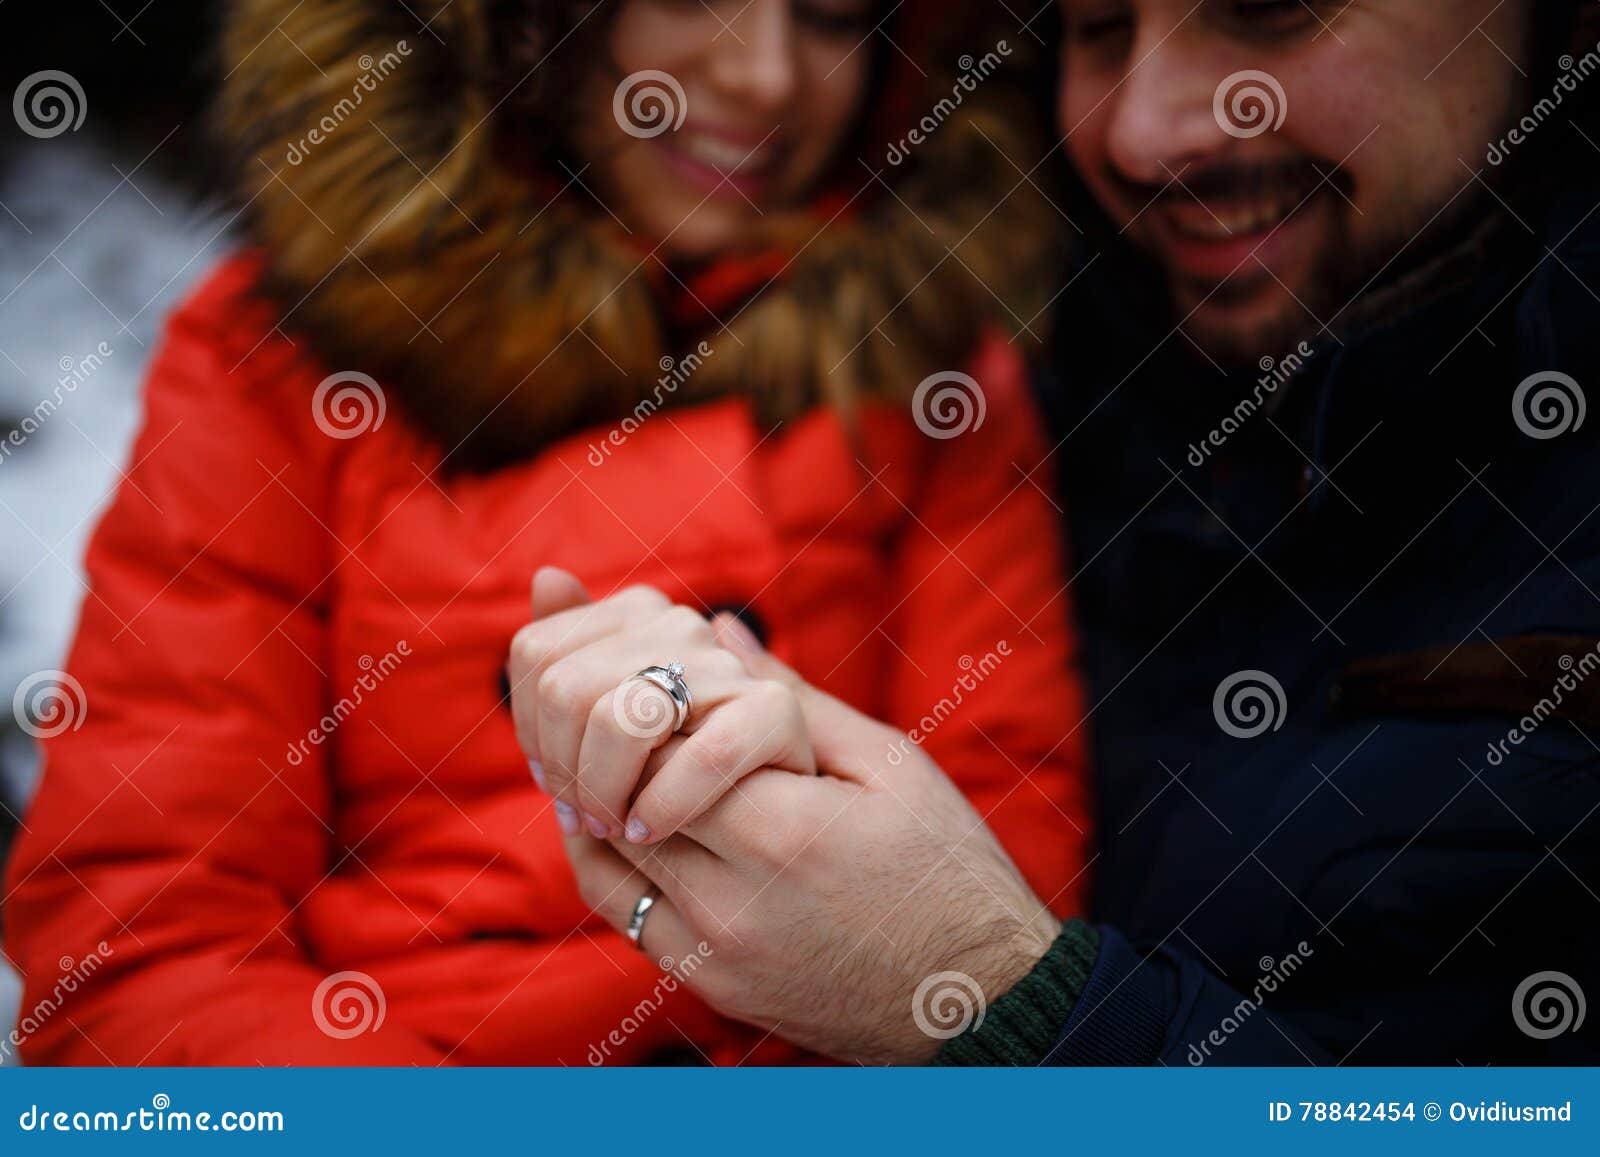 newly weds holding hands and showing wedding rings